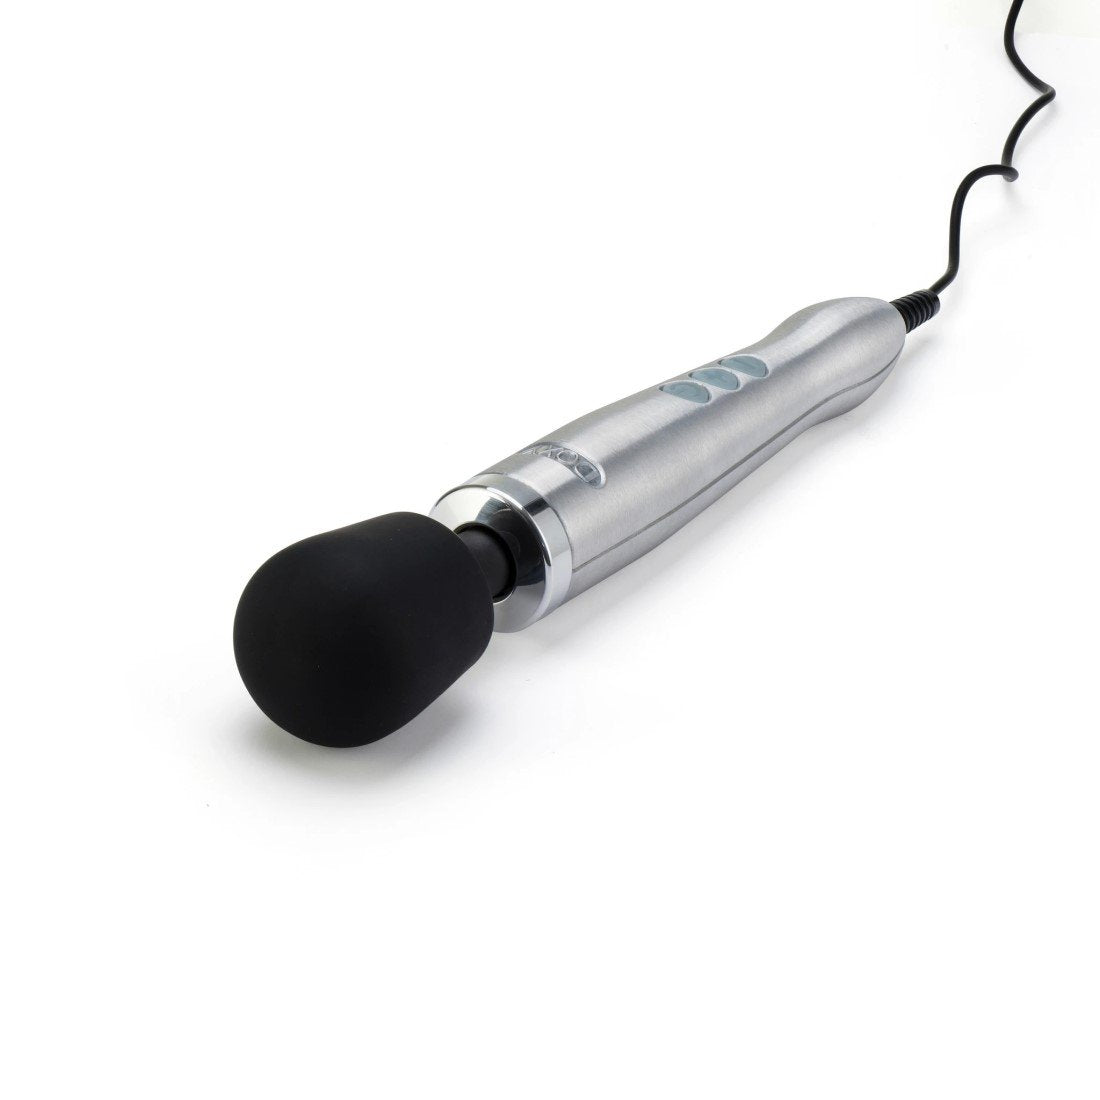 Doxy Diecast Brushed Metal Silver Plug-In Vibrating Wand Massager